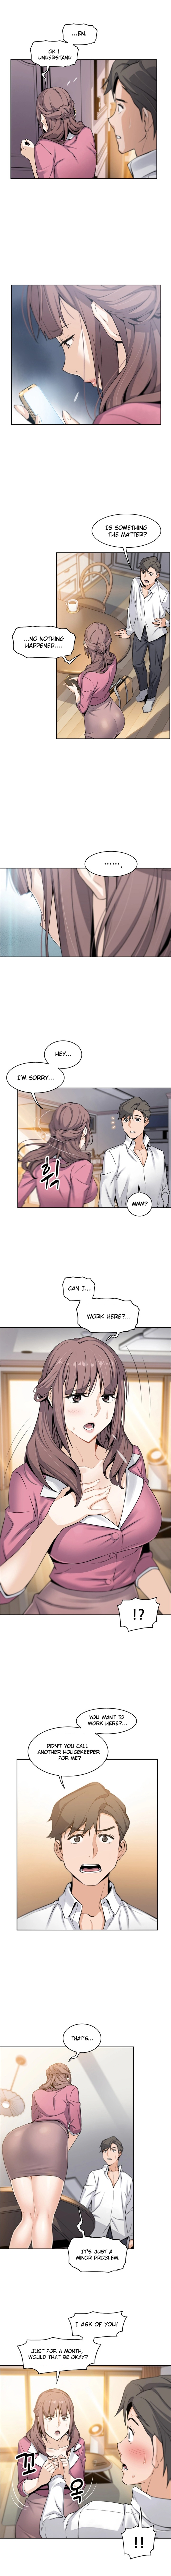 Housekeeper Manhwa - Chapter 8 Page 6